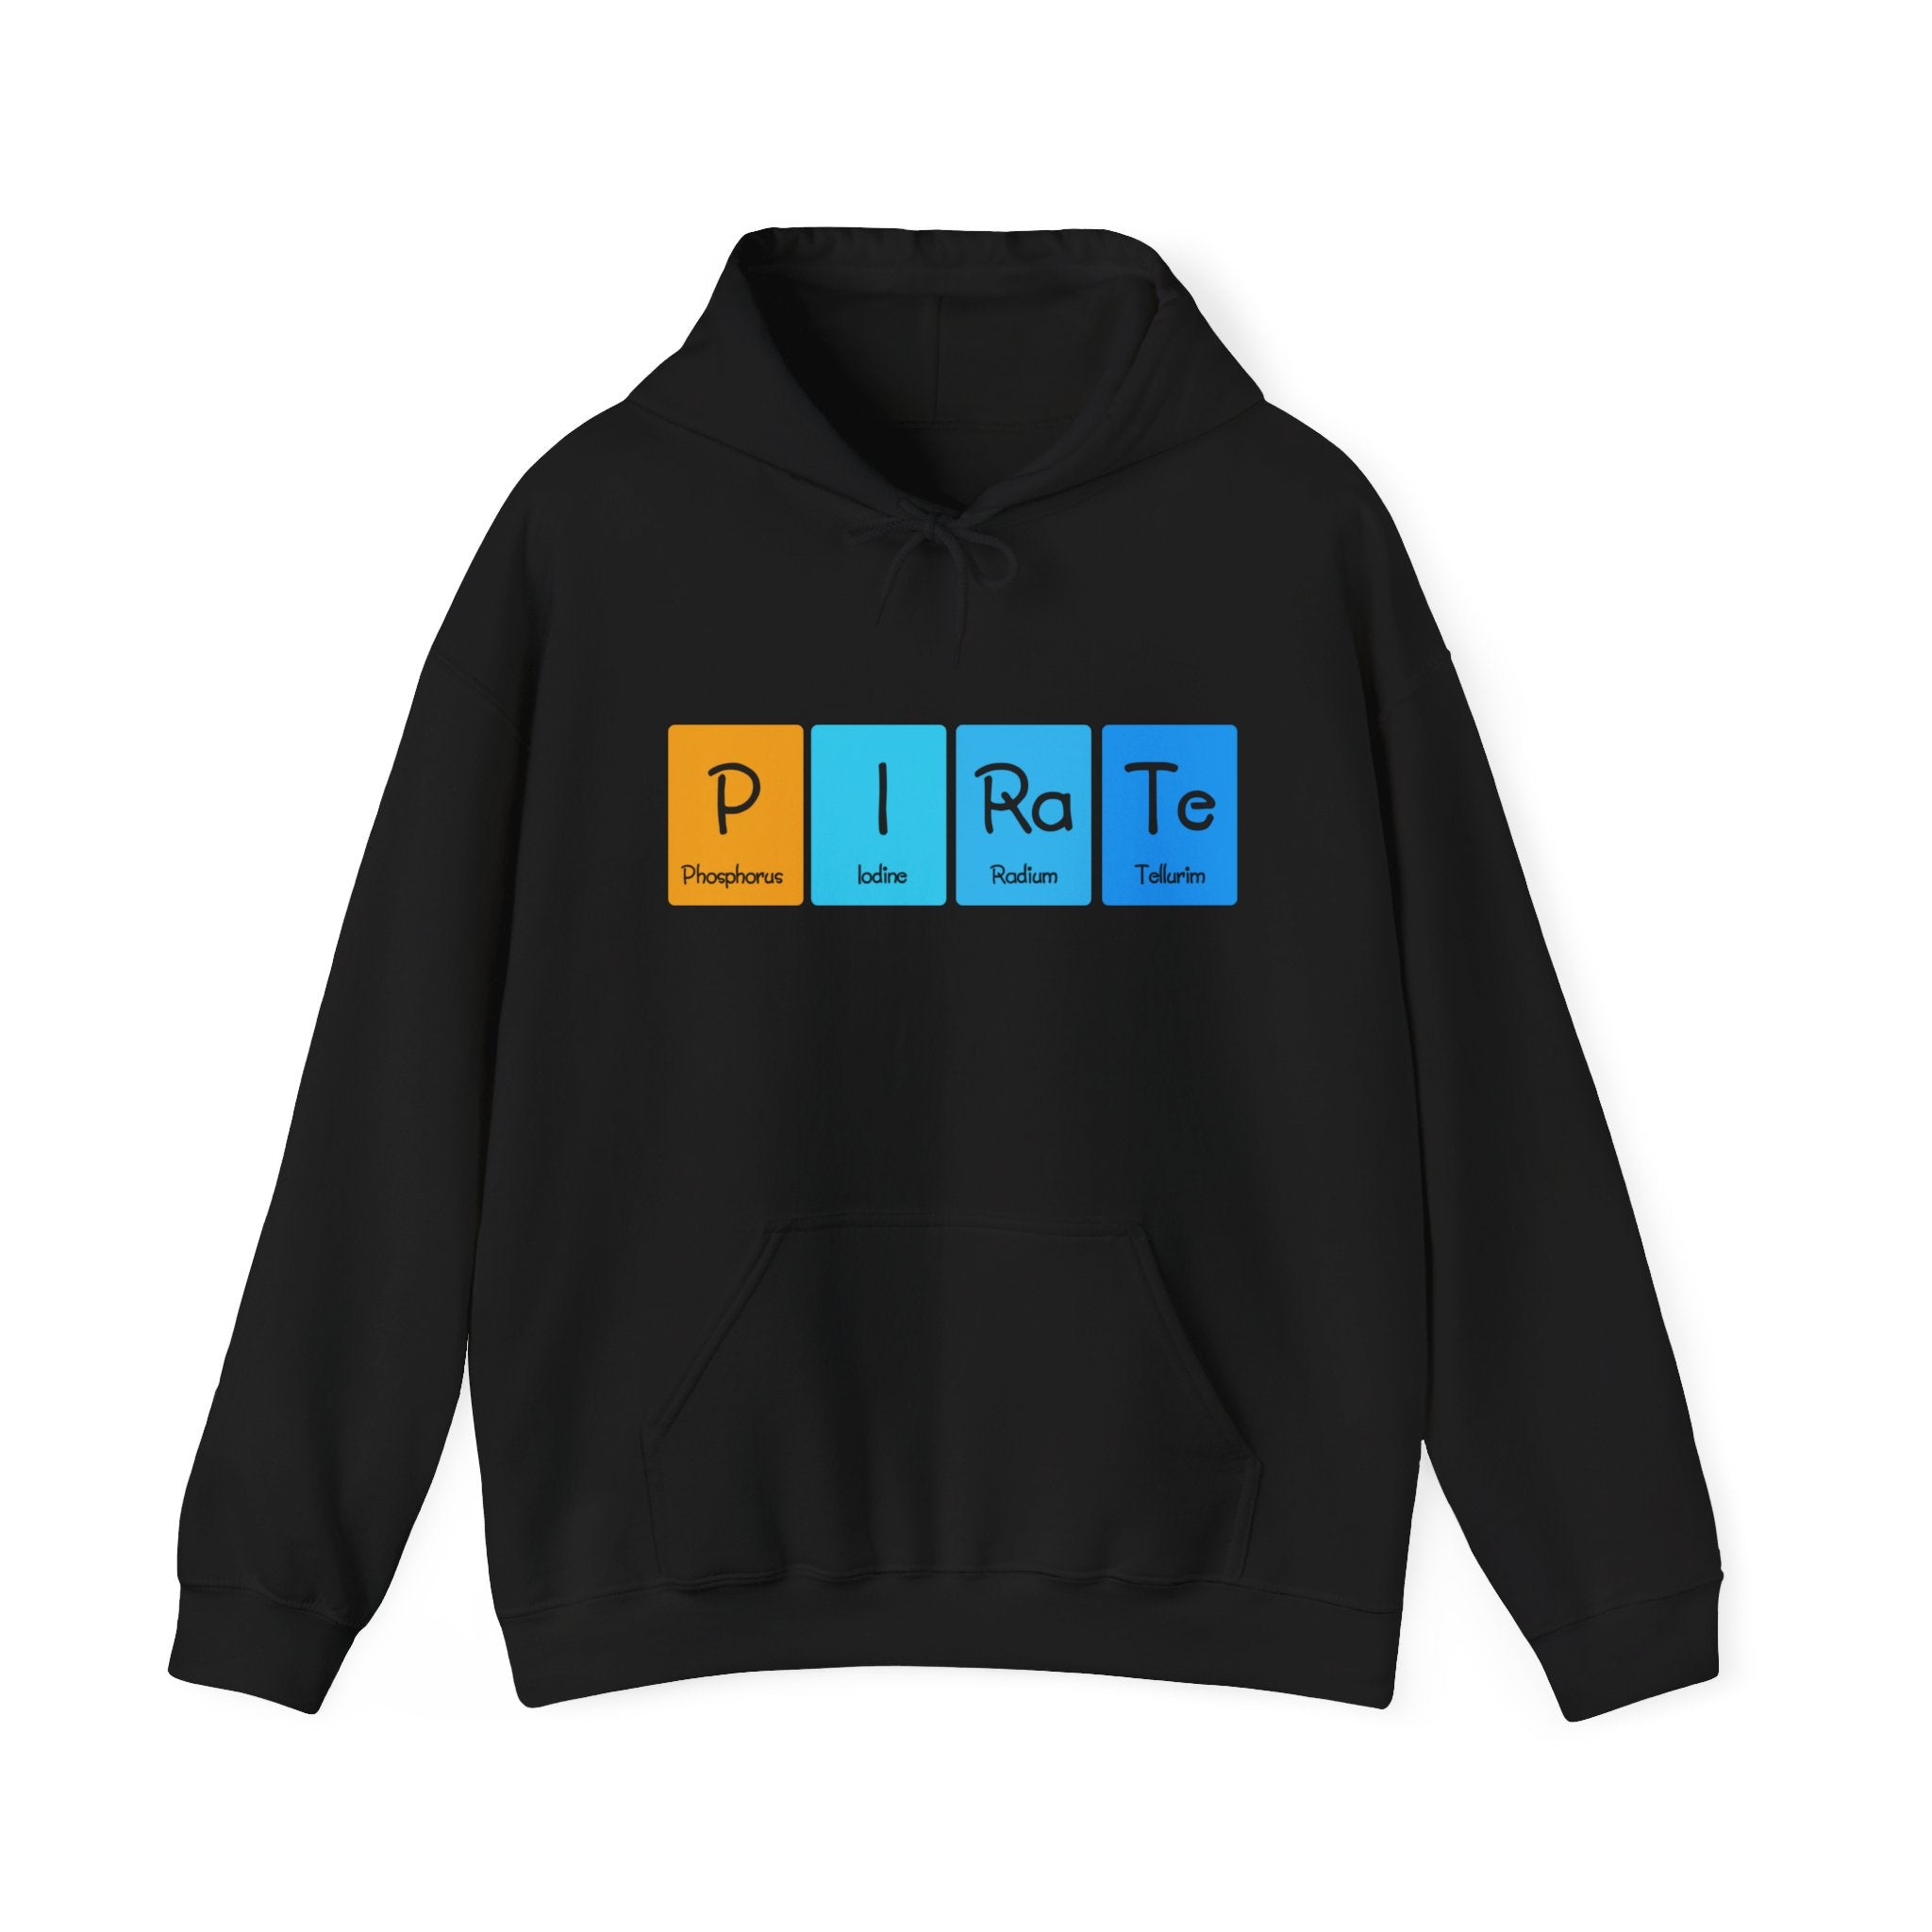 A black hoodie offers comfort and style, showcasing the word "Pirate" using periodic table elements represented by colorful blocks. Perfect for the modern adventurer, this P-I-Ra-Te - Hooded Sweatshirt combines unique flair with everyday practicality.